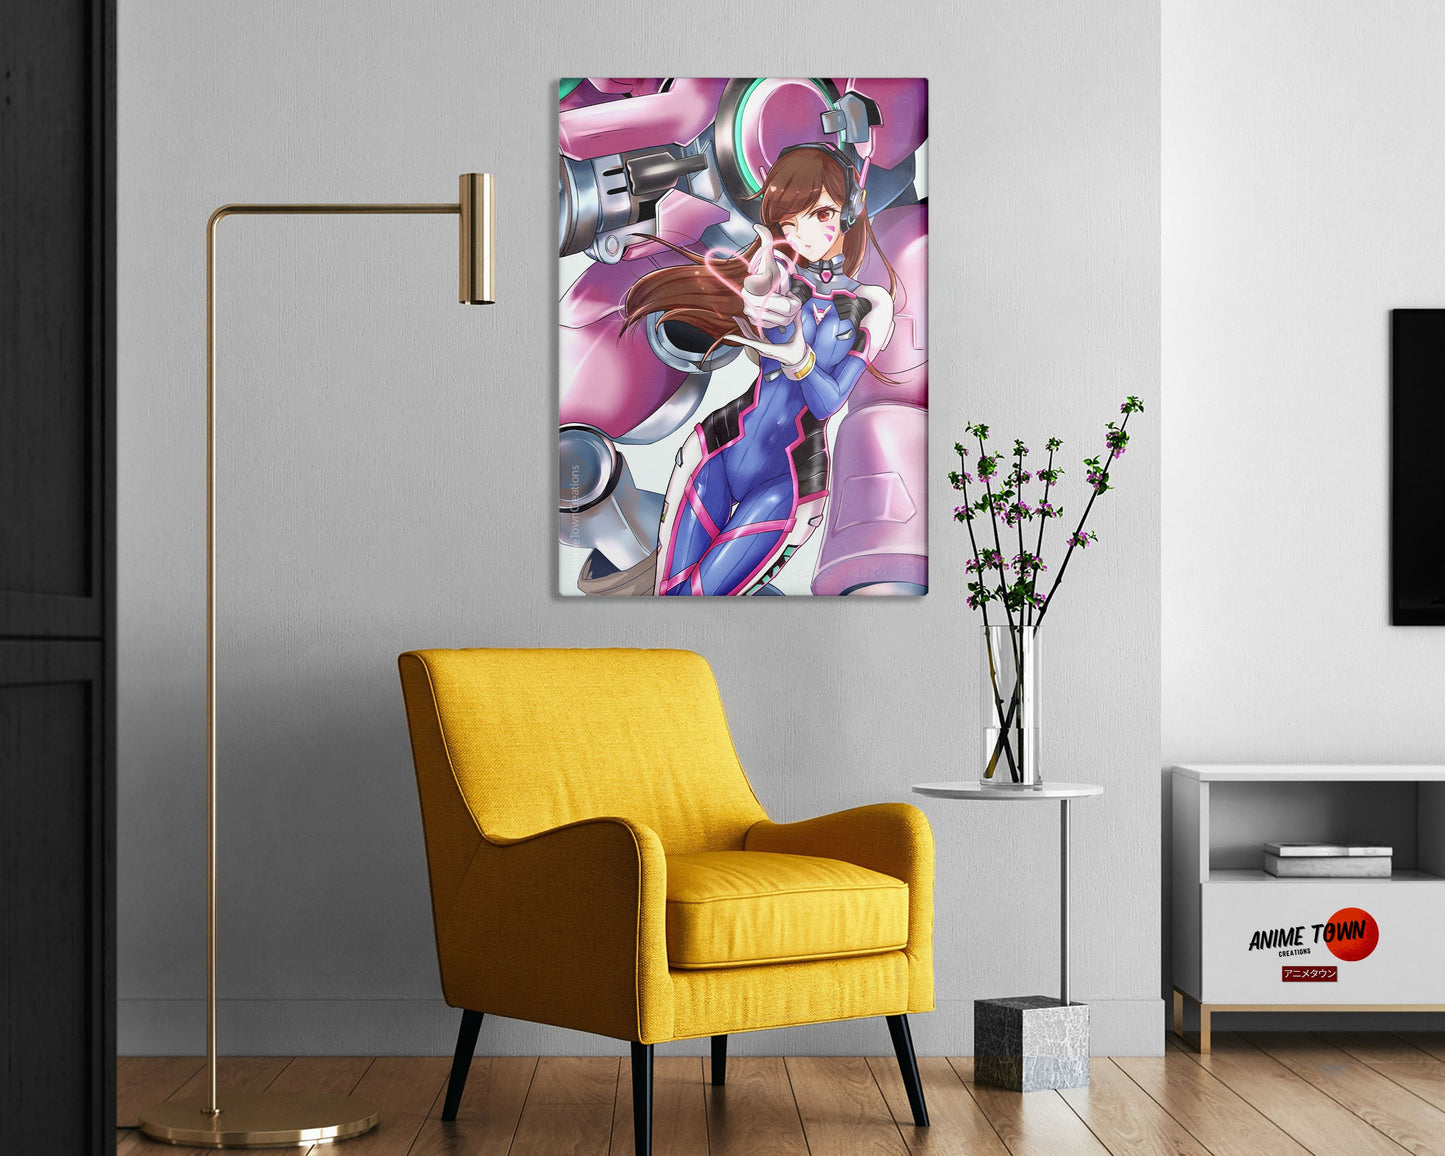 Anime Town Creations Metal Poster Overwatch D.Va 24" x 36" Home Goods - Anime Overwatch Metal Poster